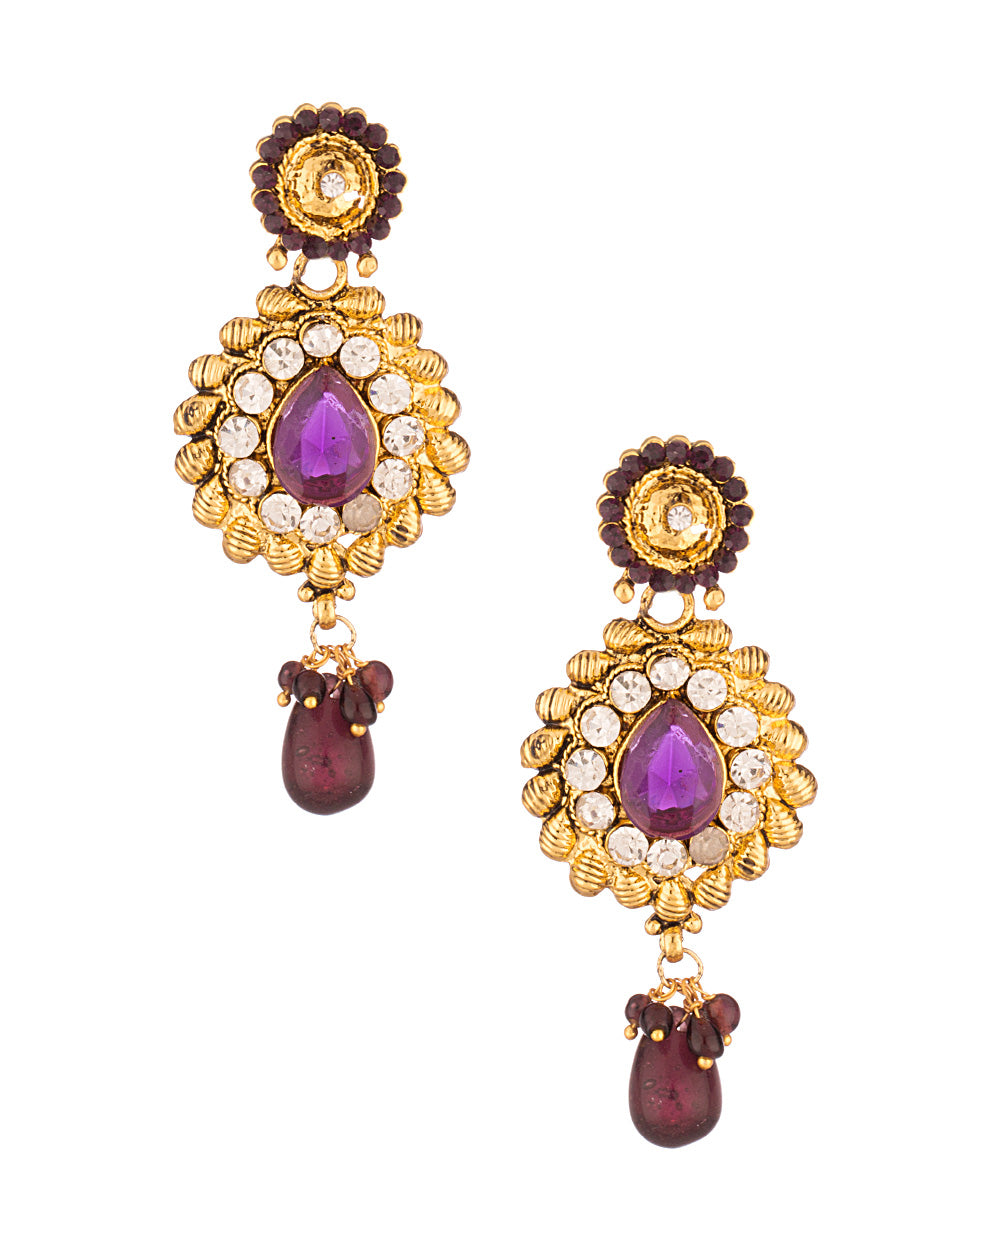 CZ Embellished Gold Toned Earring Pair Featuring Black Stone Droppings